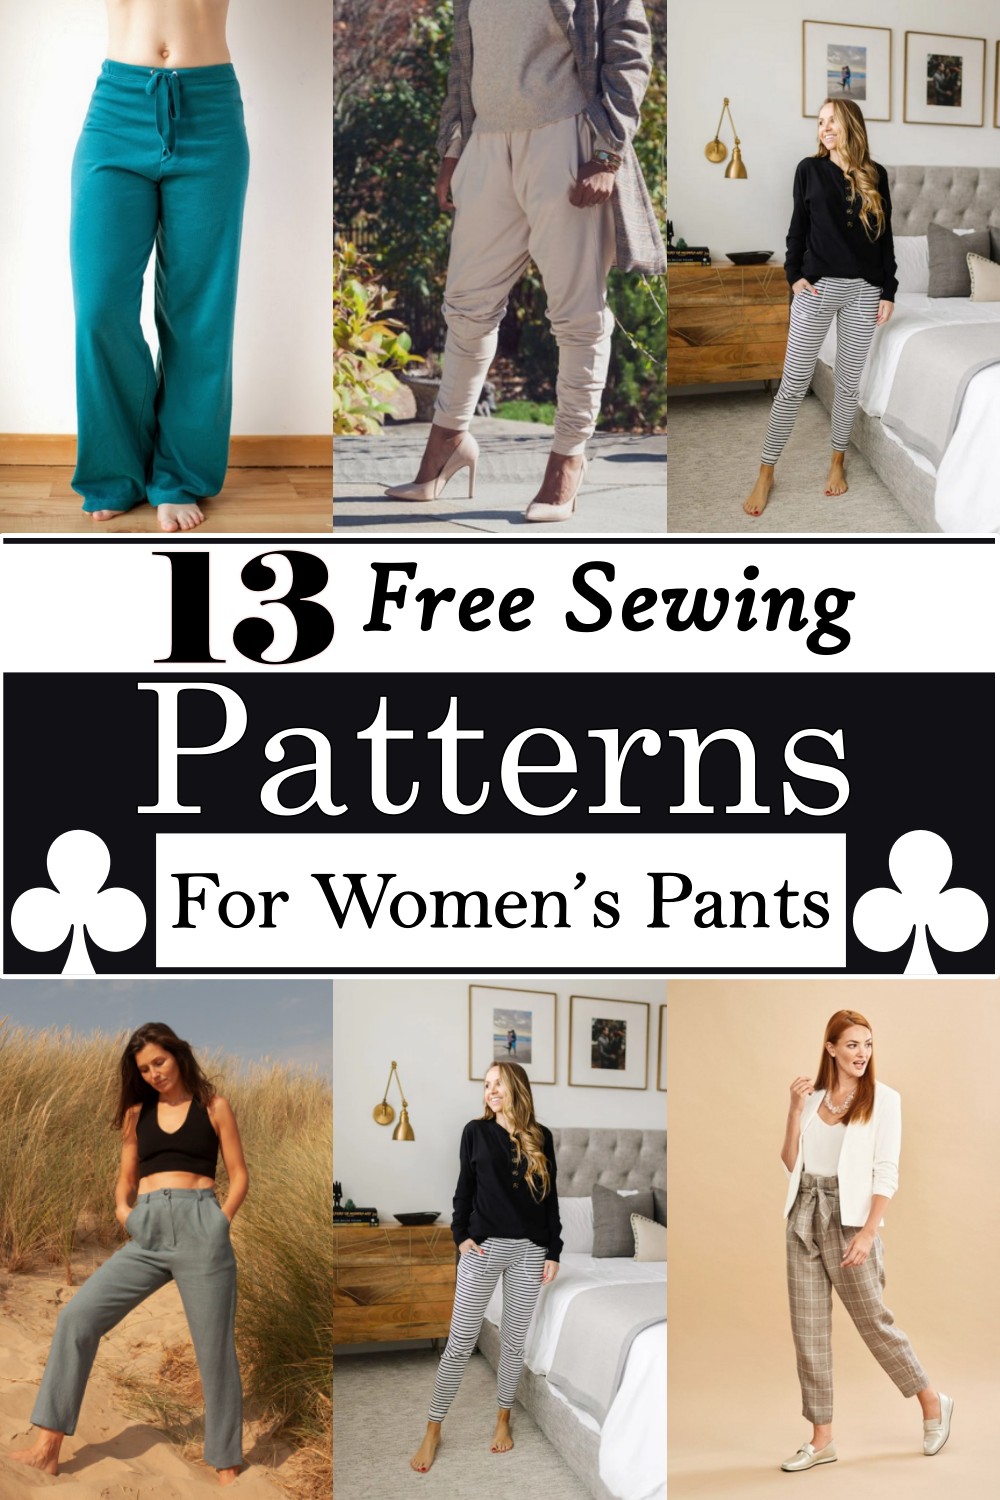 Free Sewing Patterns For Women’s Pants 1